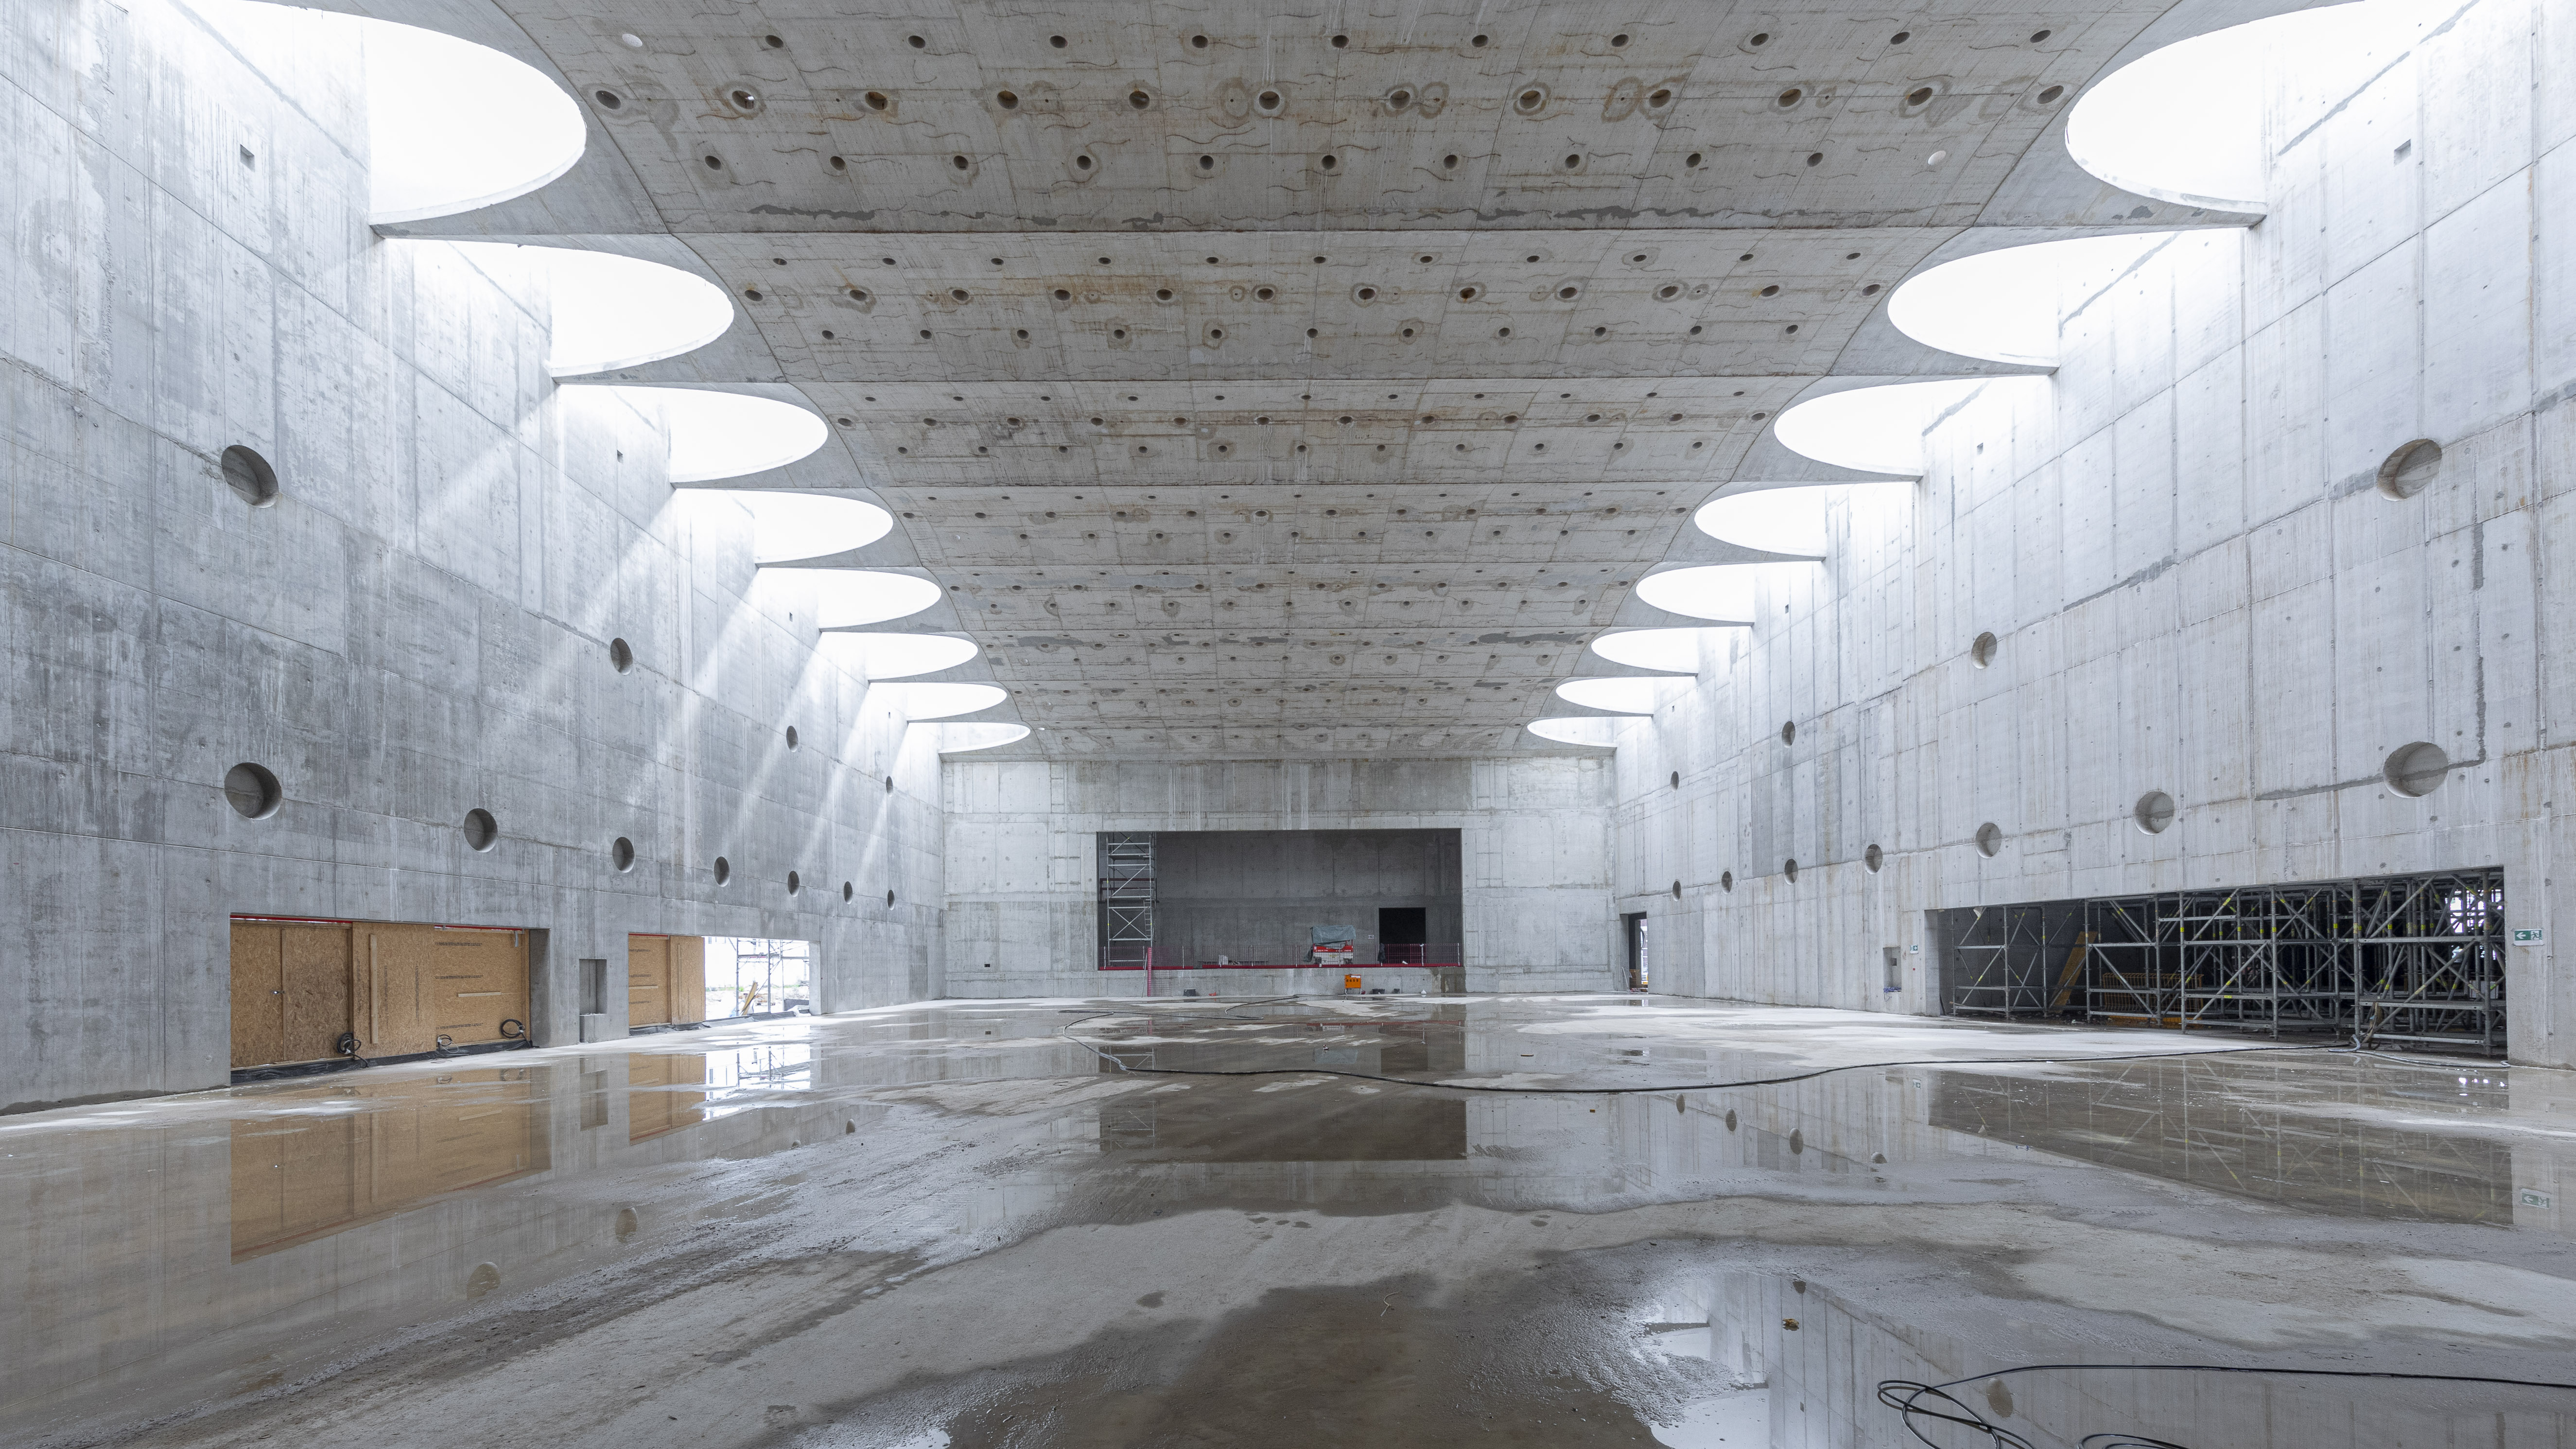 View into a large hall in shell construction, floor, ceiling and walls made of concrete, skylight comes through open semicircles at the ceiling